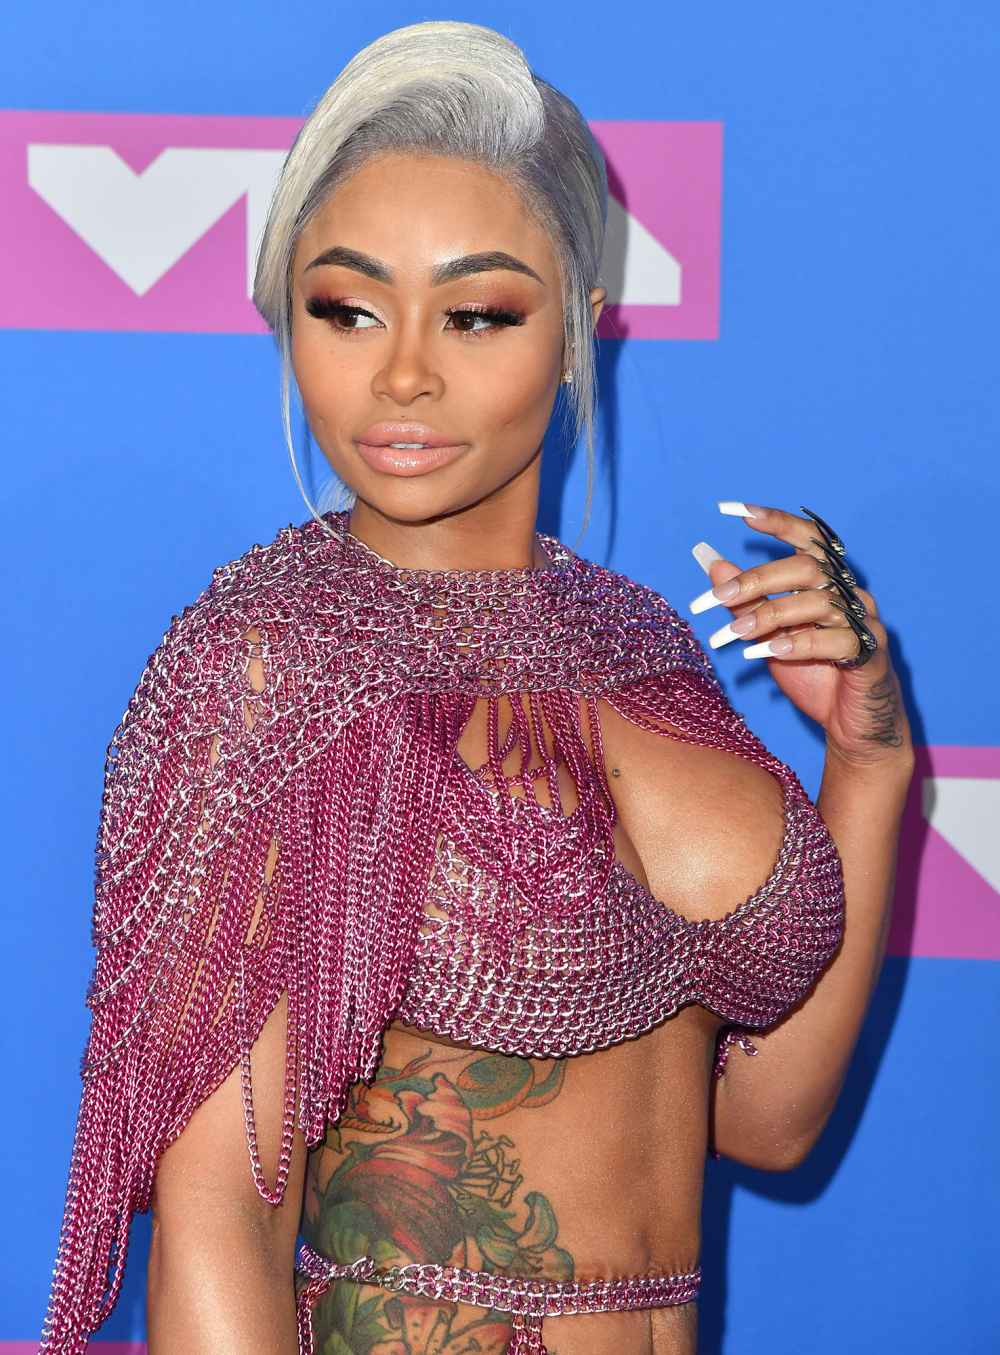 Blac Chyna’s Lawyer Hits Back After Child Protective Services Called to Home